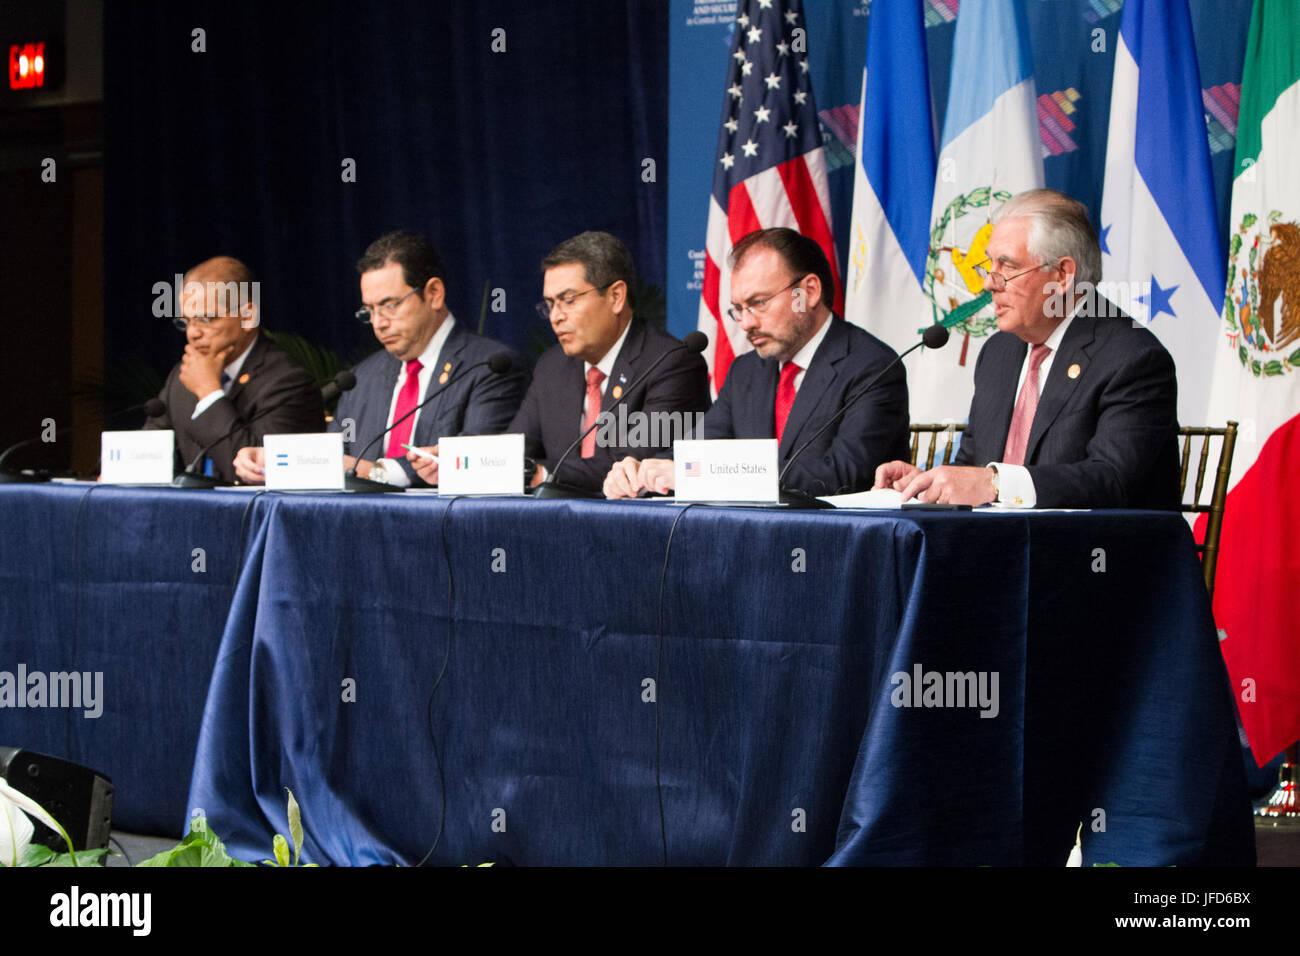 U.S. Secretary of State Tillerson addresses reporters at a joint press availability with his counterparts from Mexico, Honduras, Guatemala, and El Salvador, at the Conference for Prosperity and Security in Central America, at Florida International University, in Miami, Florida, on June 15, 2017. Stock Photo